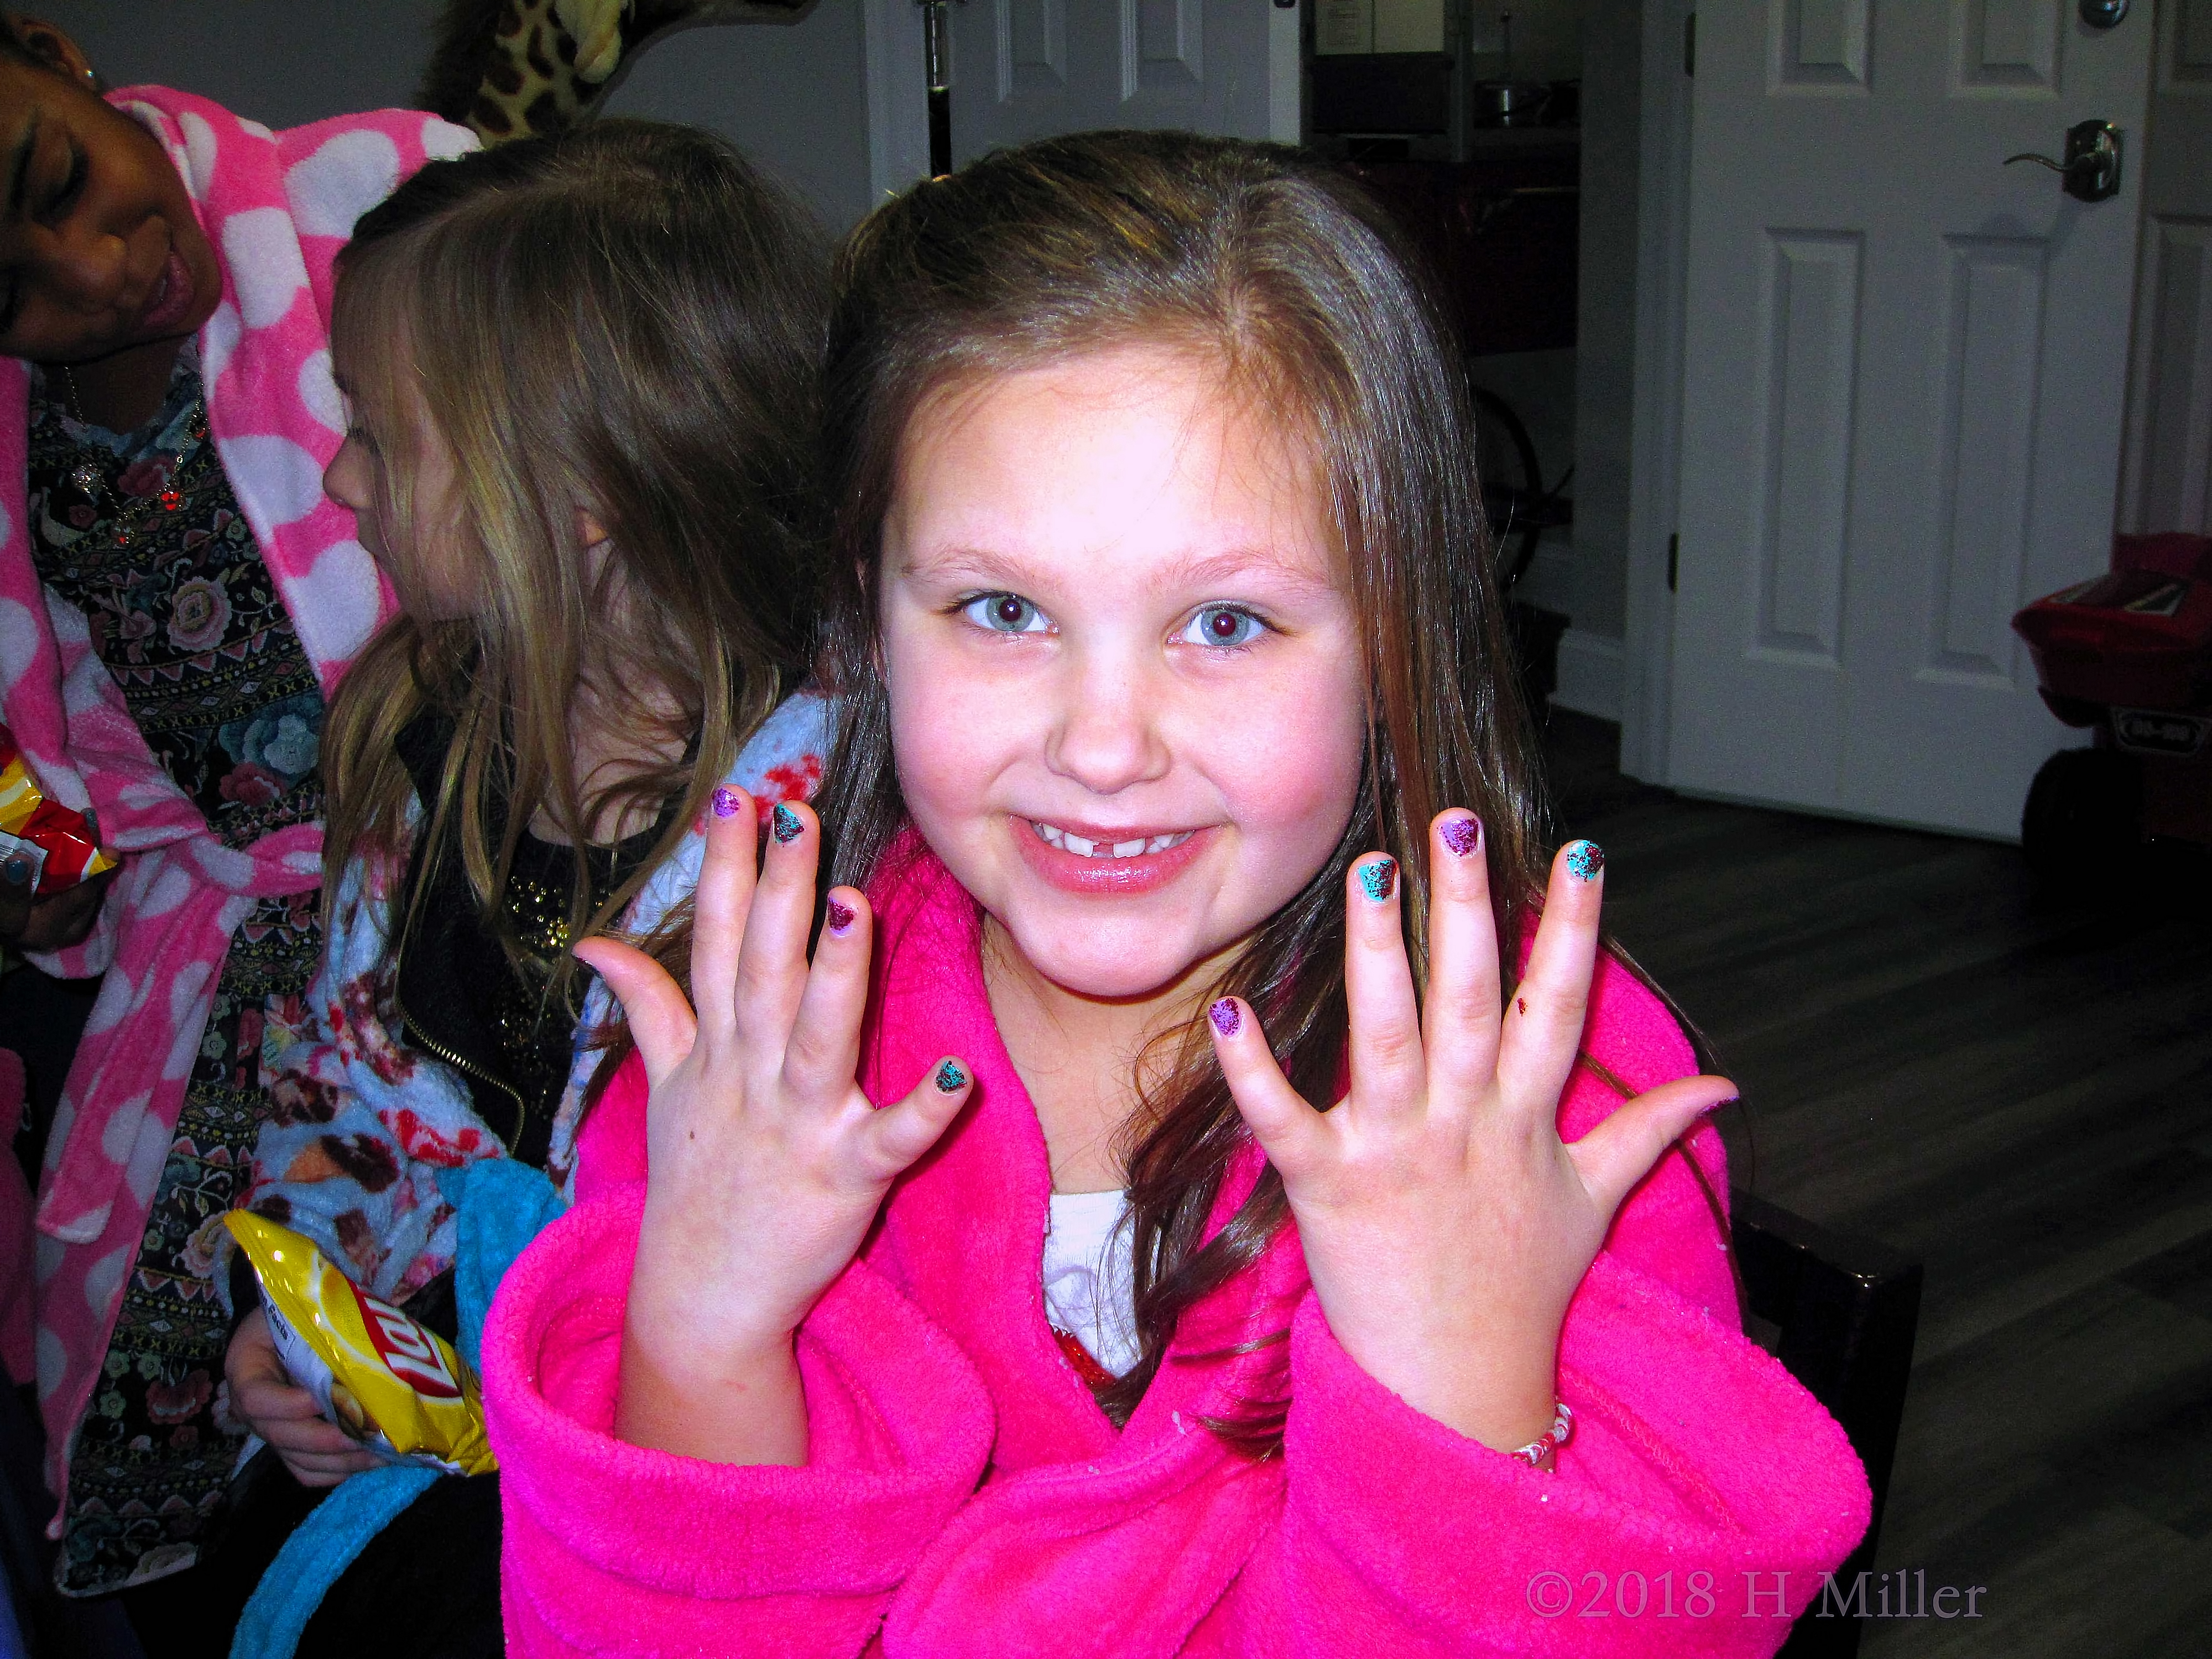 Kids Party Guest Posing With Her Multicolored Sparkle Girls Manicure!